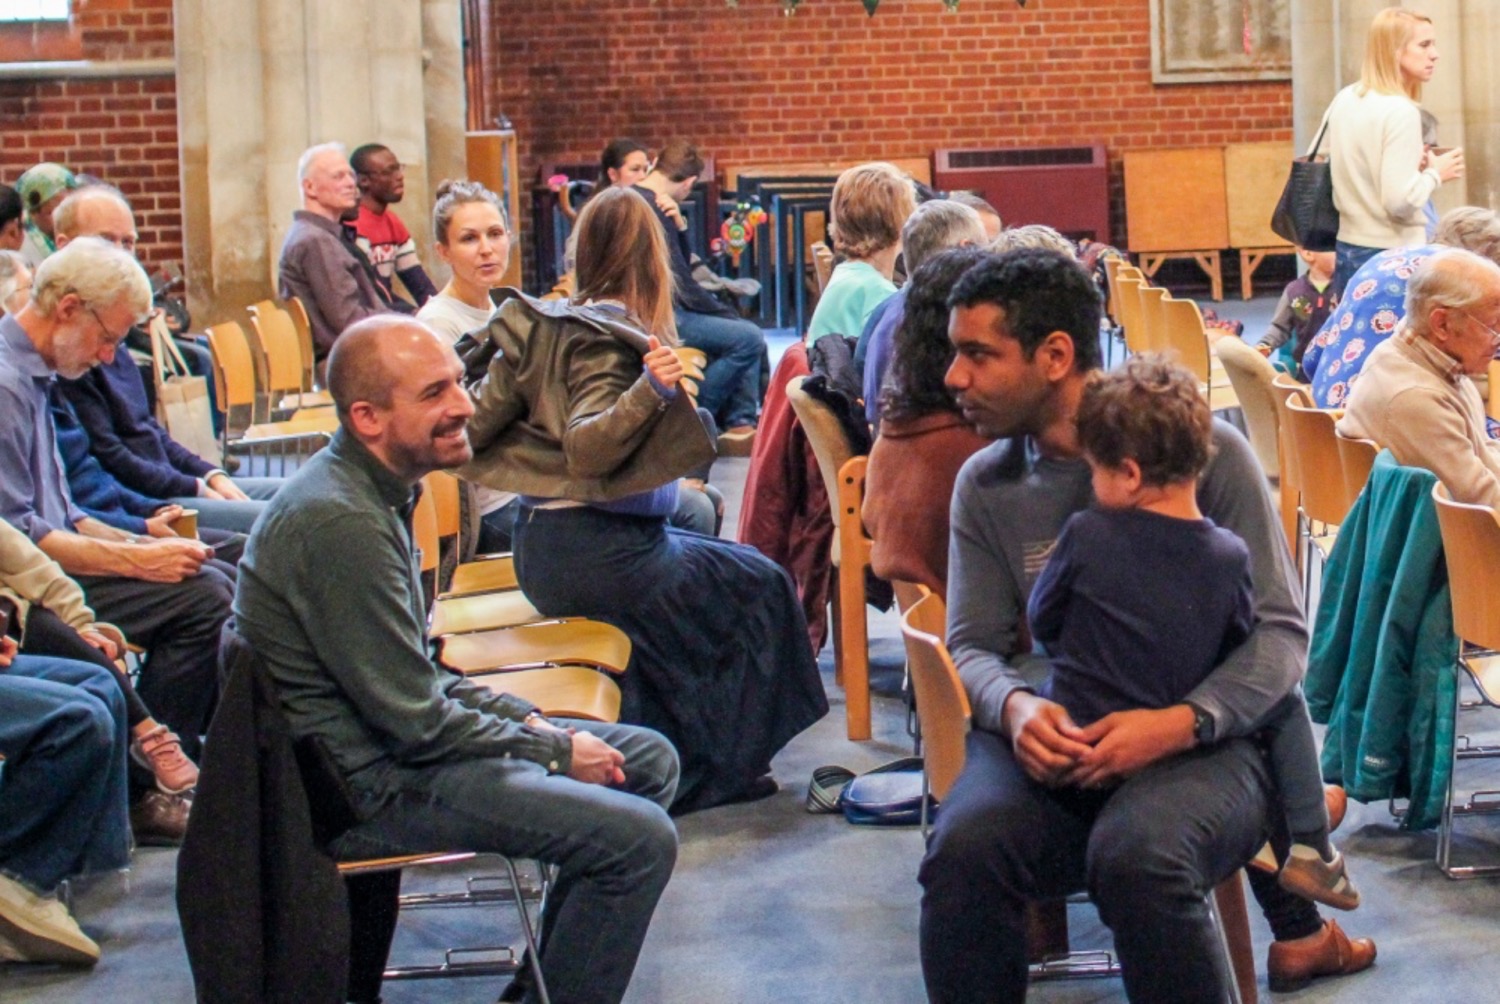 People of all ages sitting together to ahead of a church service in conversation